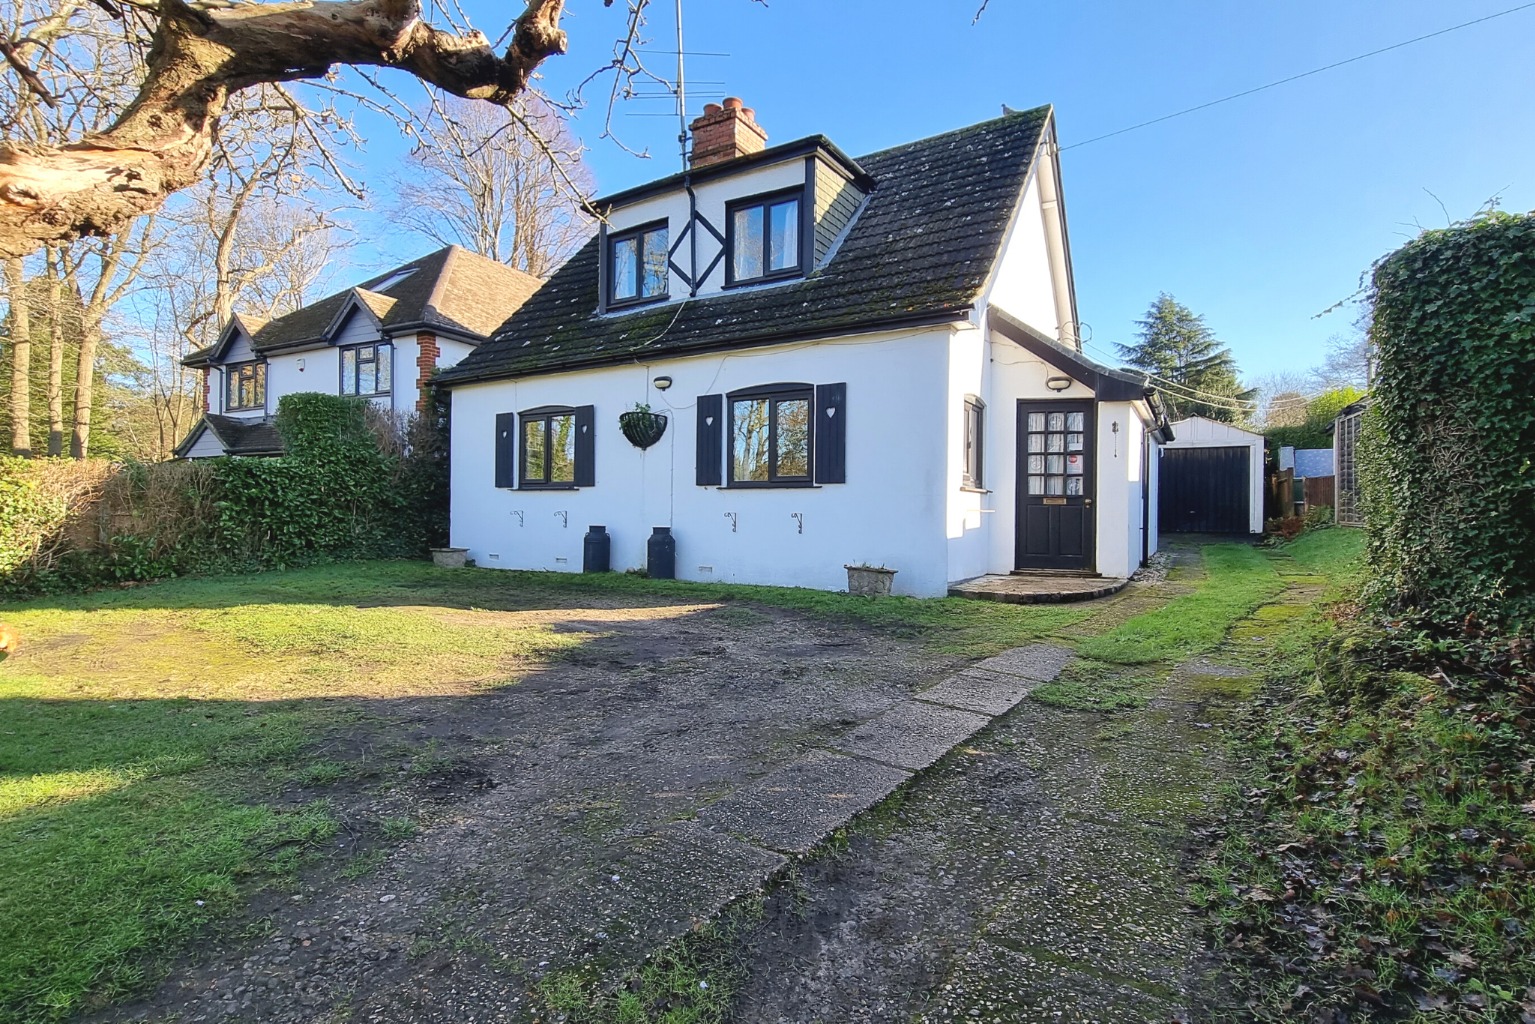 A wonderful three bedroom detached family home sitting on a large plot